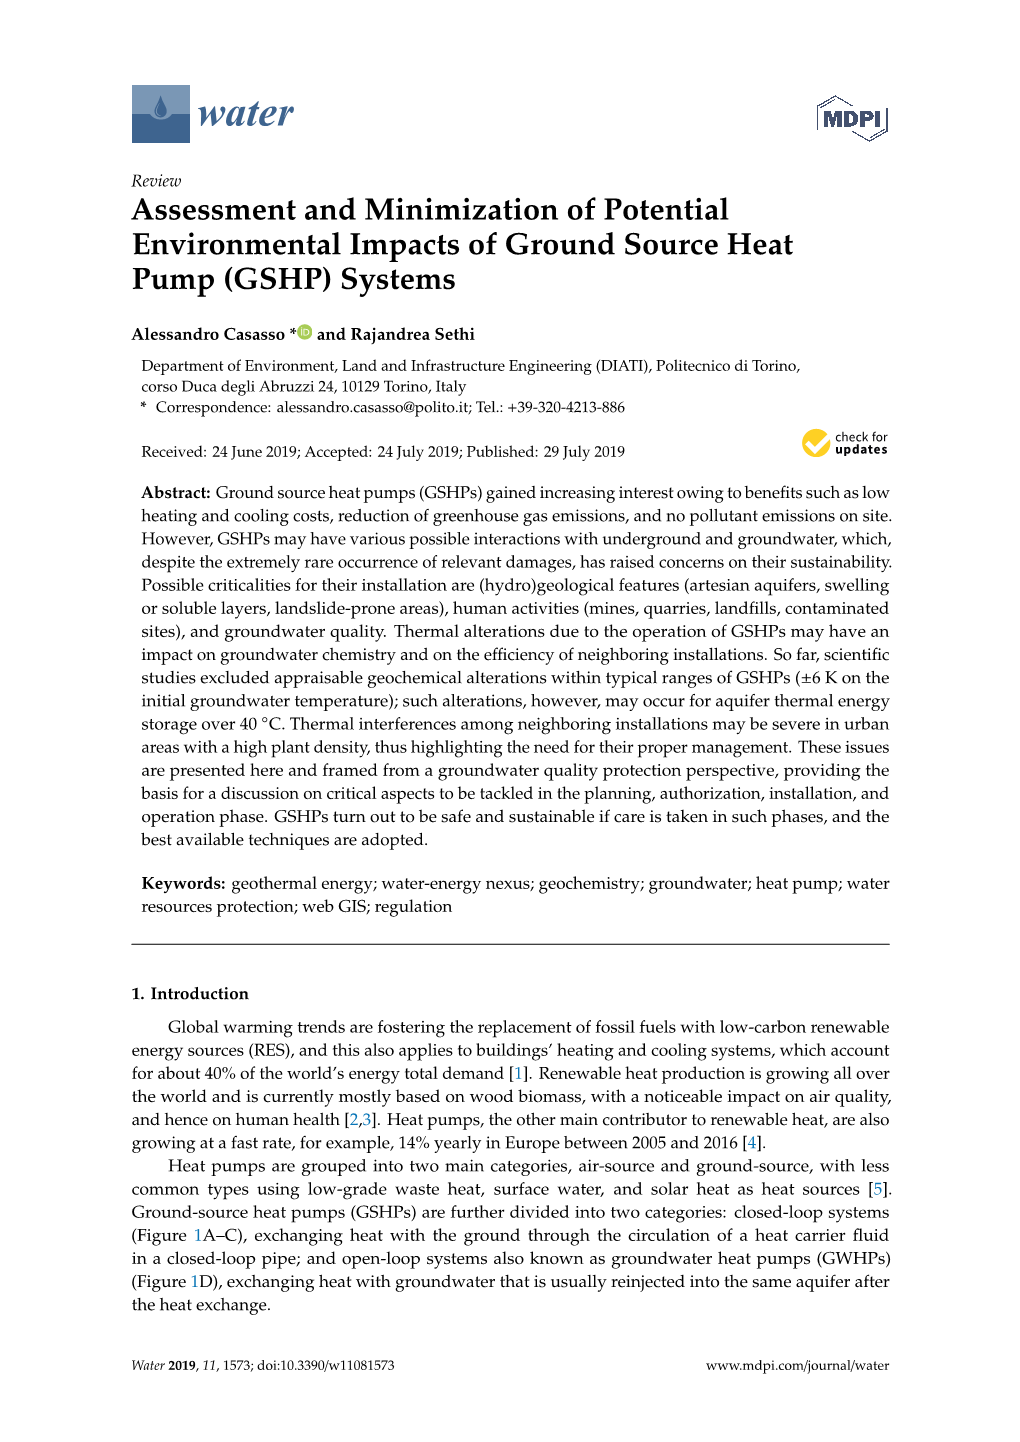 Assessment and Minimization of Potential Environmental Impacts of Ground Source Heat Pump (GSHP) Systems